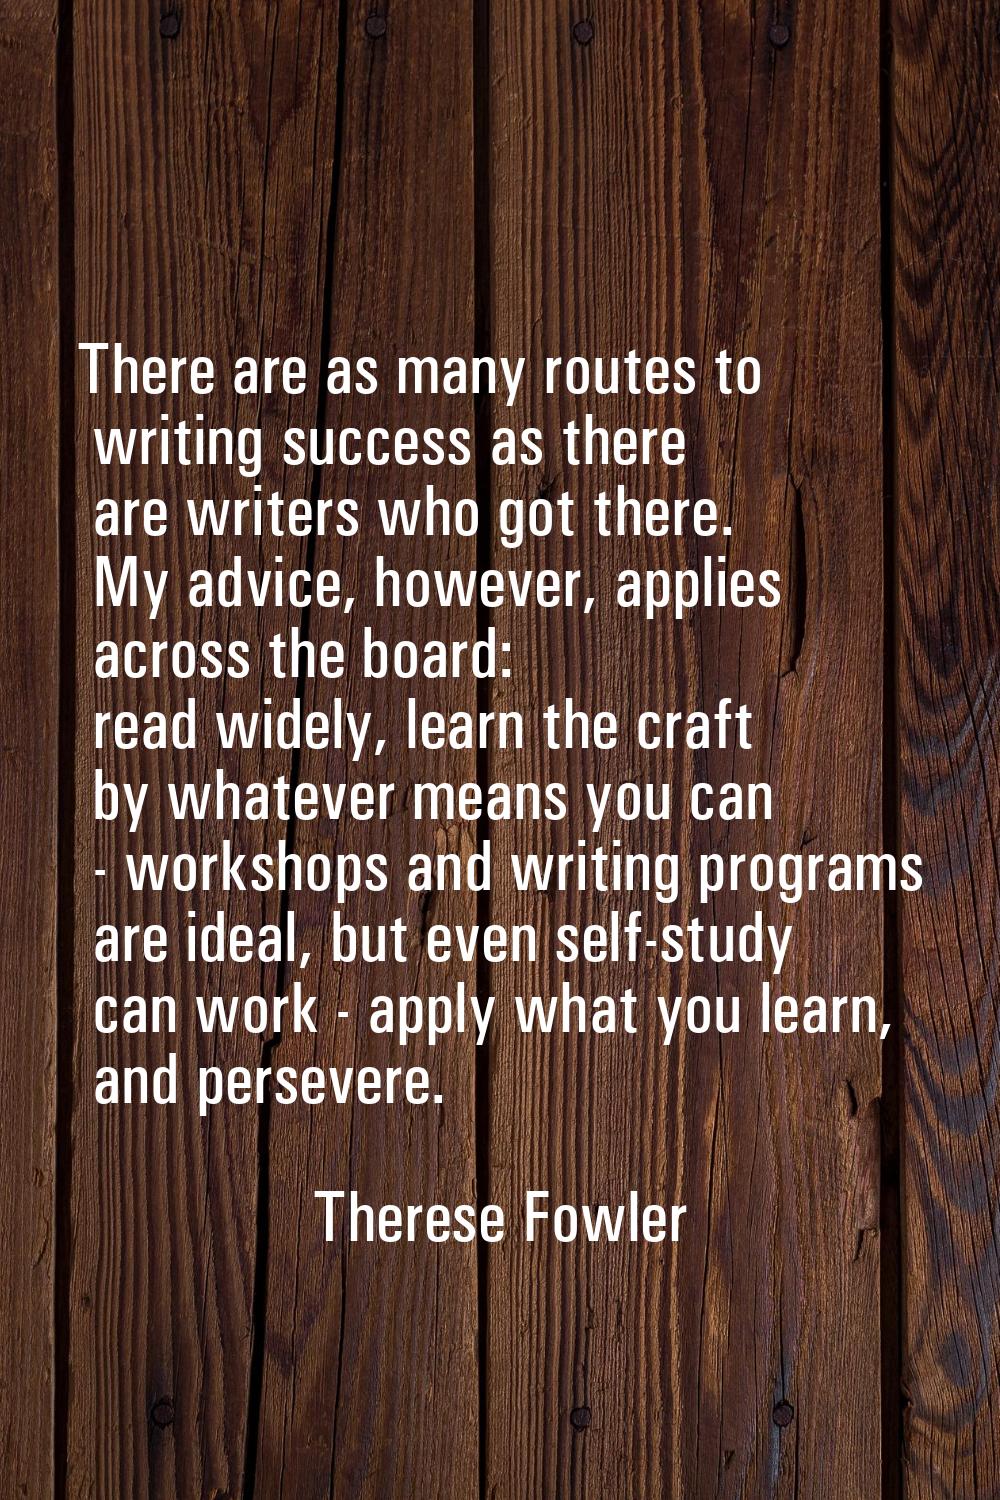 There are as many routes to writing success as there are writers who got there. My advice, however,